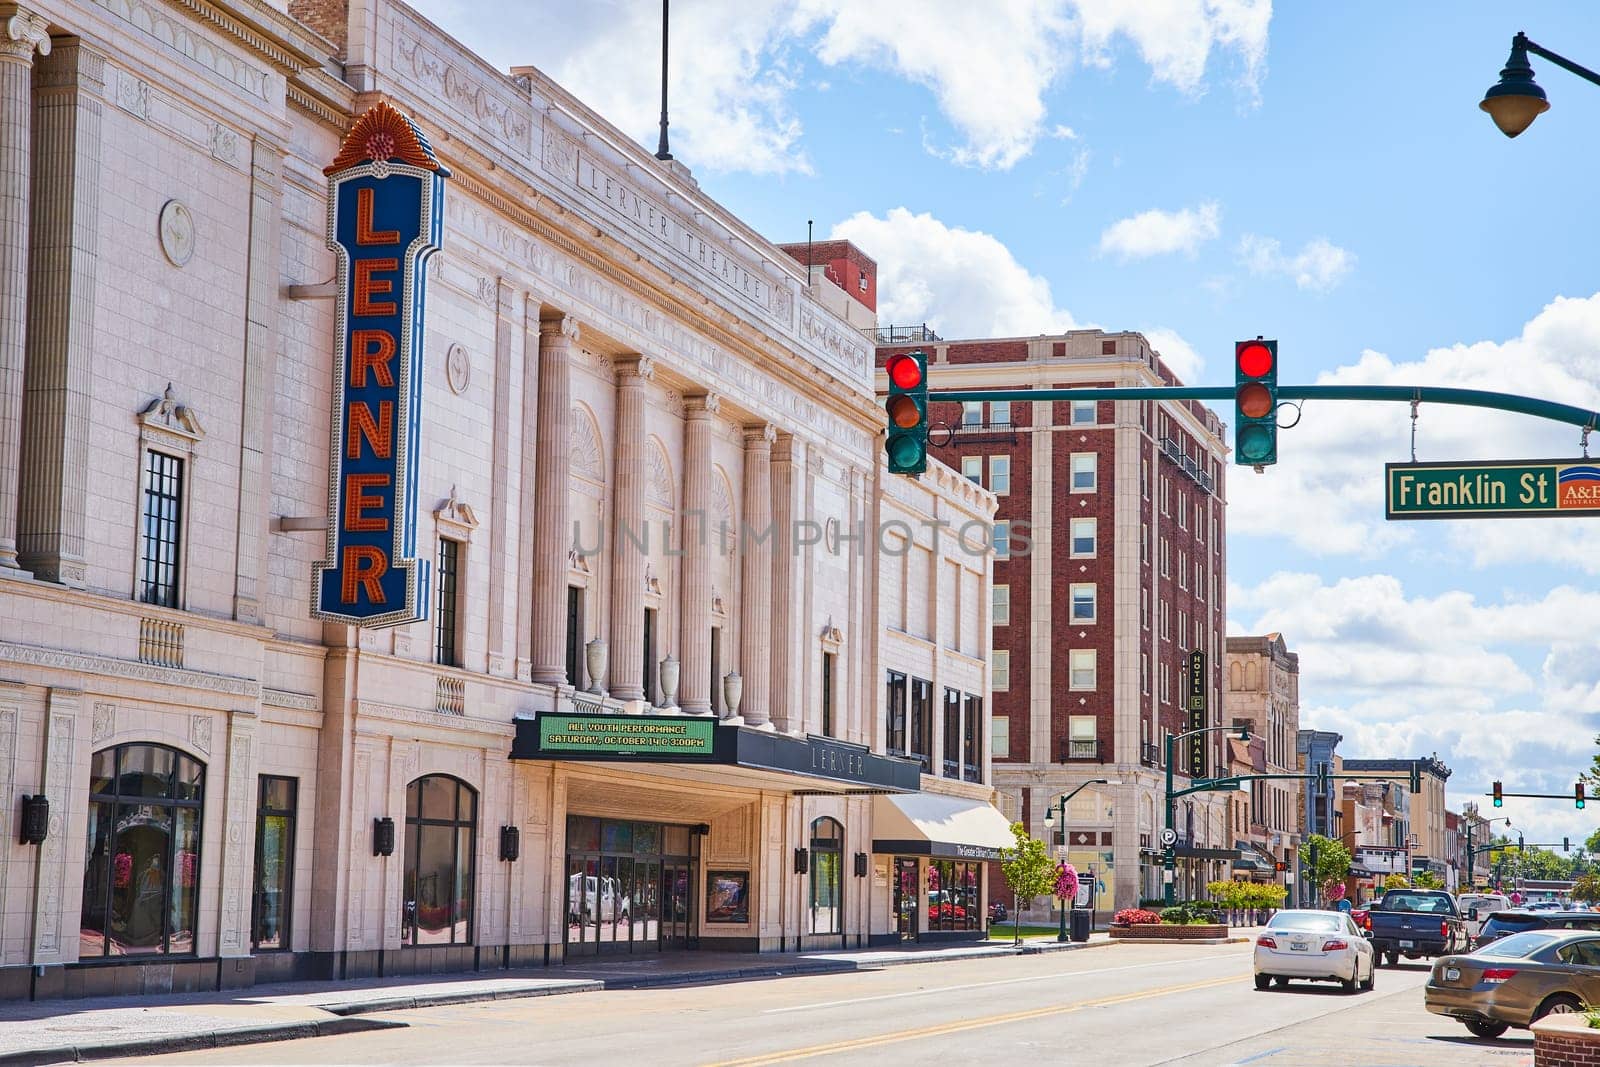 Lerner Theatre Facade and Bustling Street Scene, Elkhart by njproductions